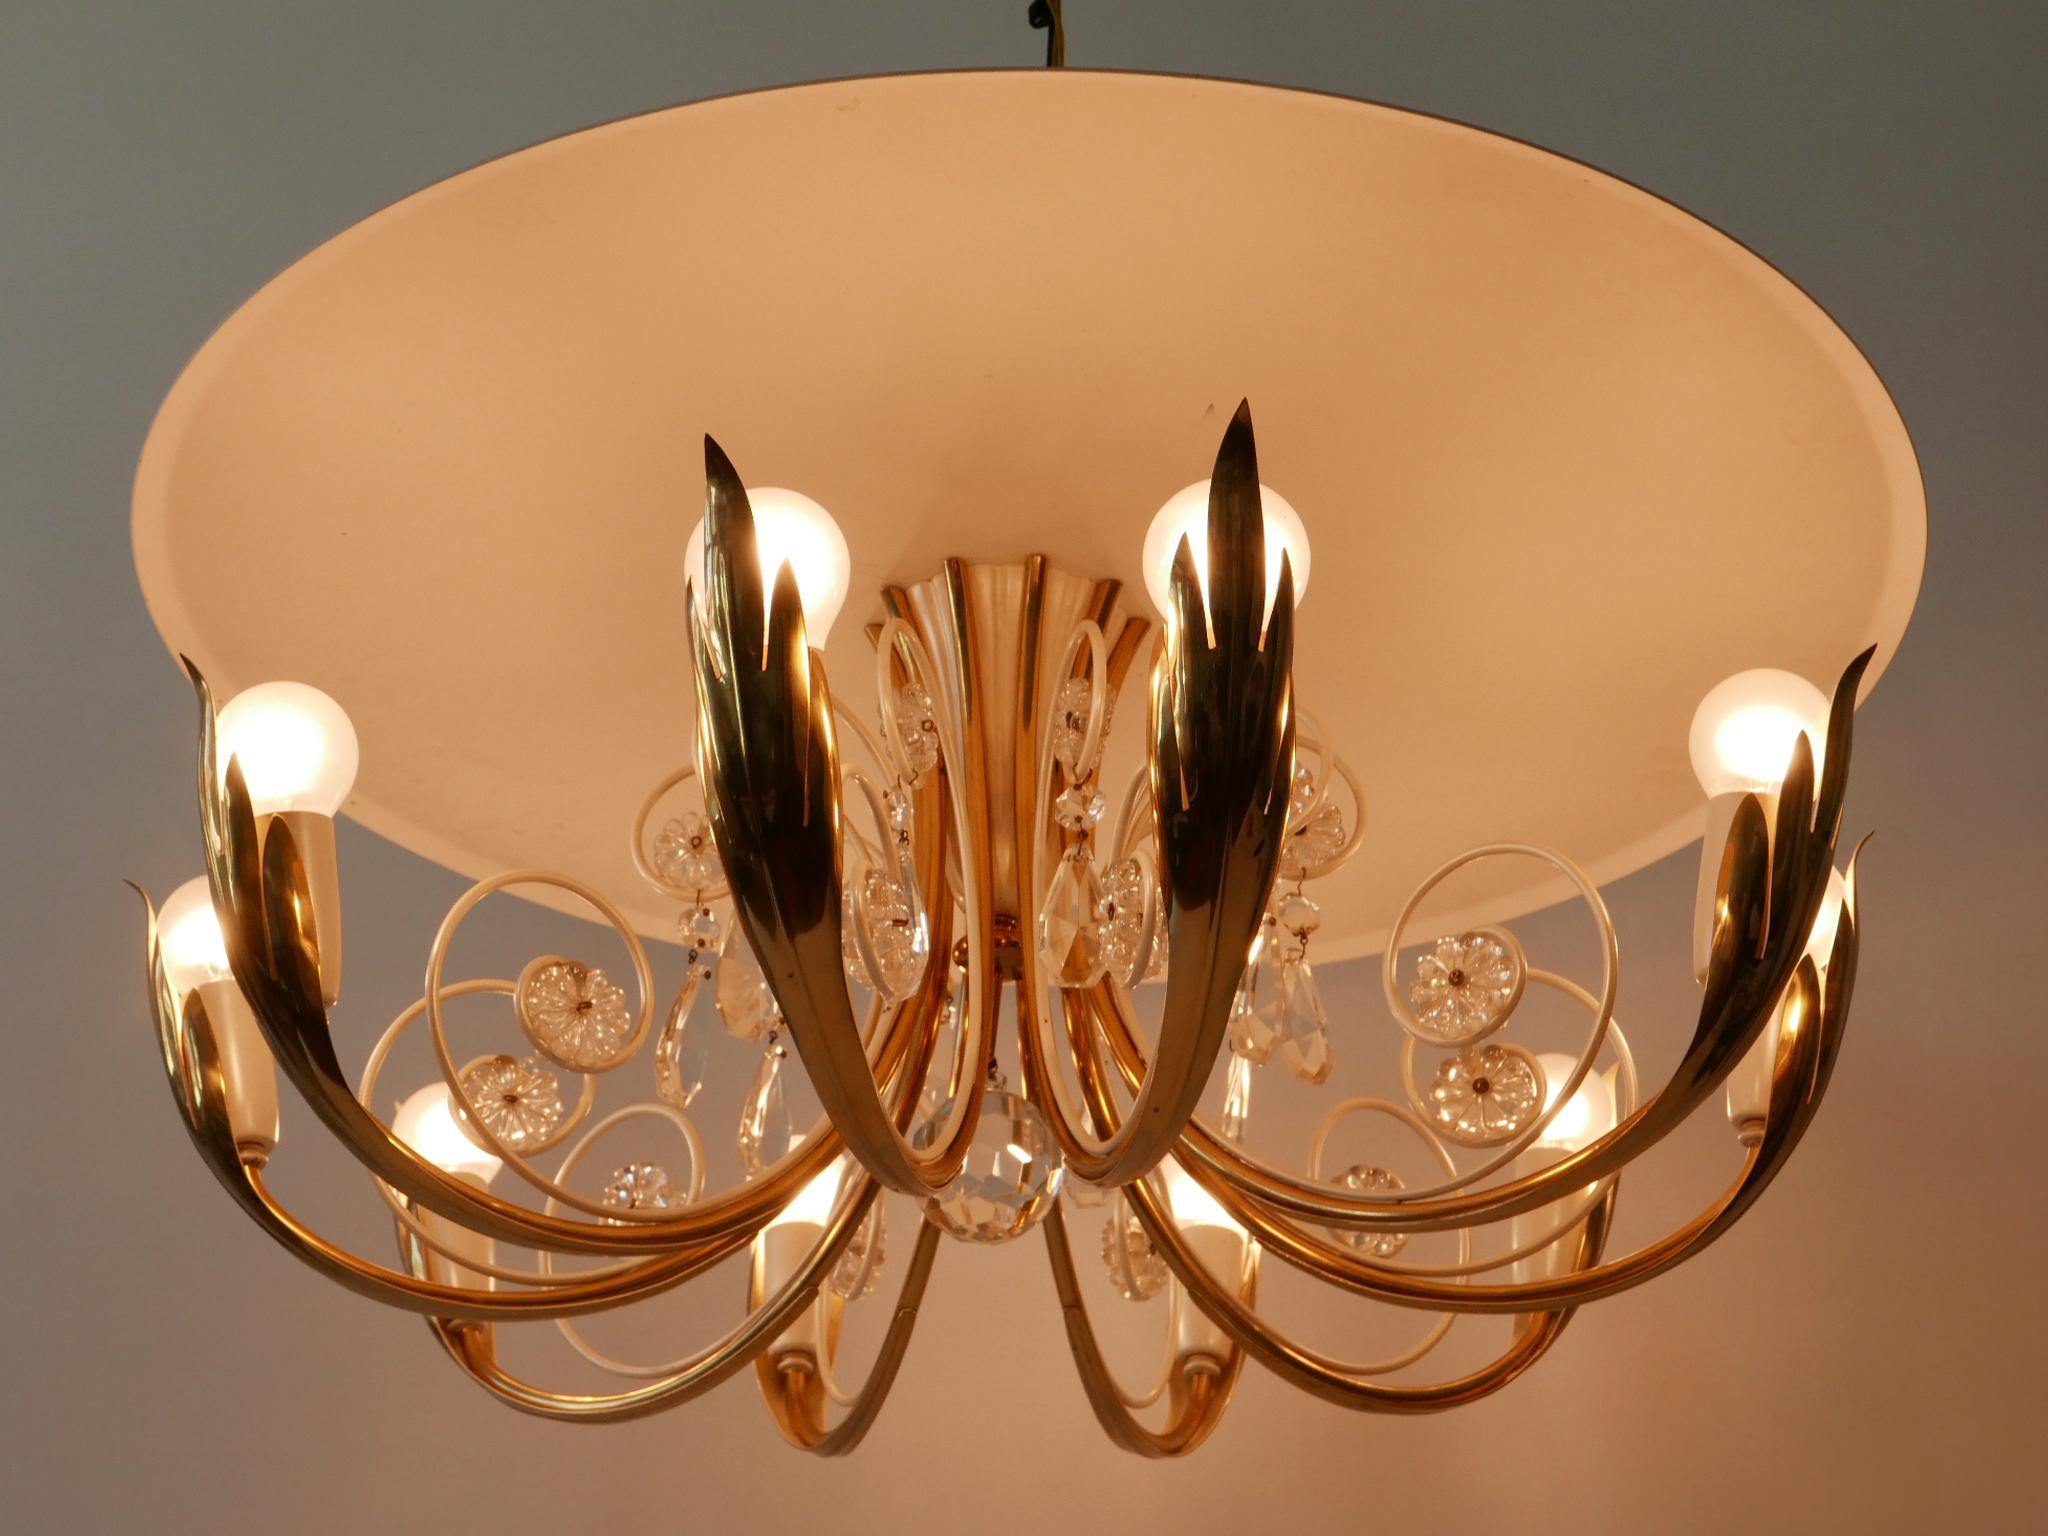 Rare, elegant, large & highly decorative Mid-Century Modern 10-flamed chandelier or ceiling lamp. Designed and manufactured by Vereinigte Werkstätten, Germany, 1950s.

Executed in brass and aluminium, the chandelier needs 10 x E14 / E12 Edison